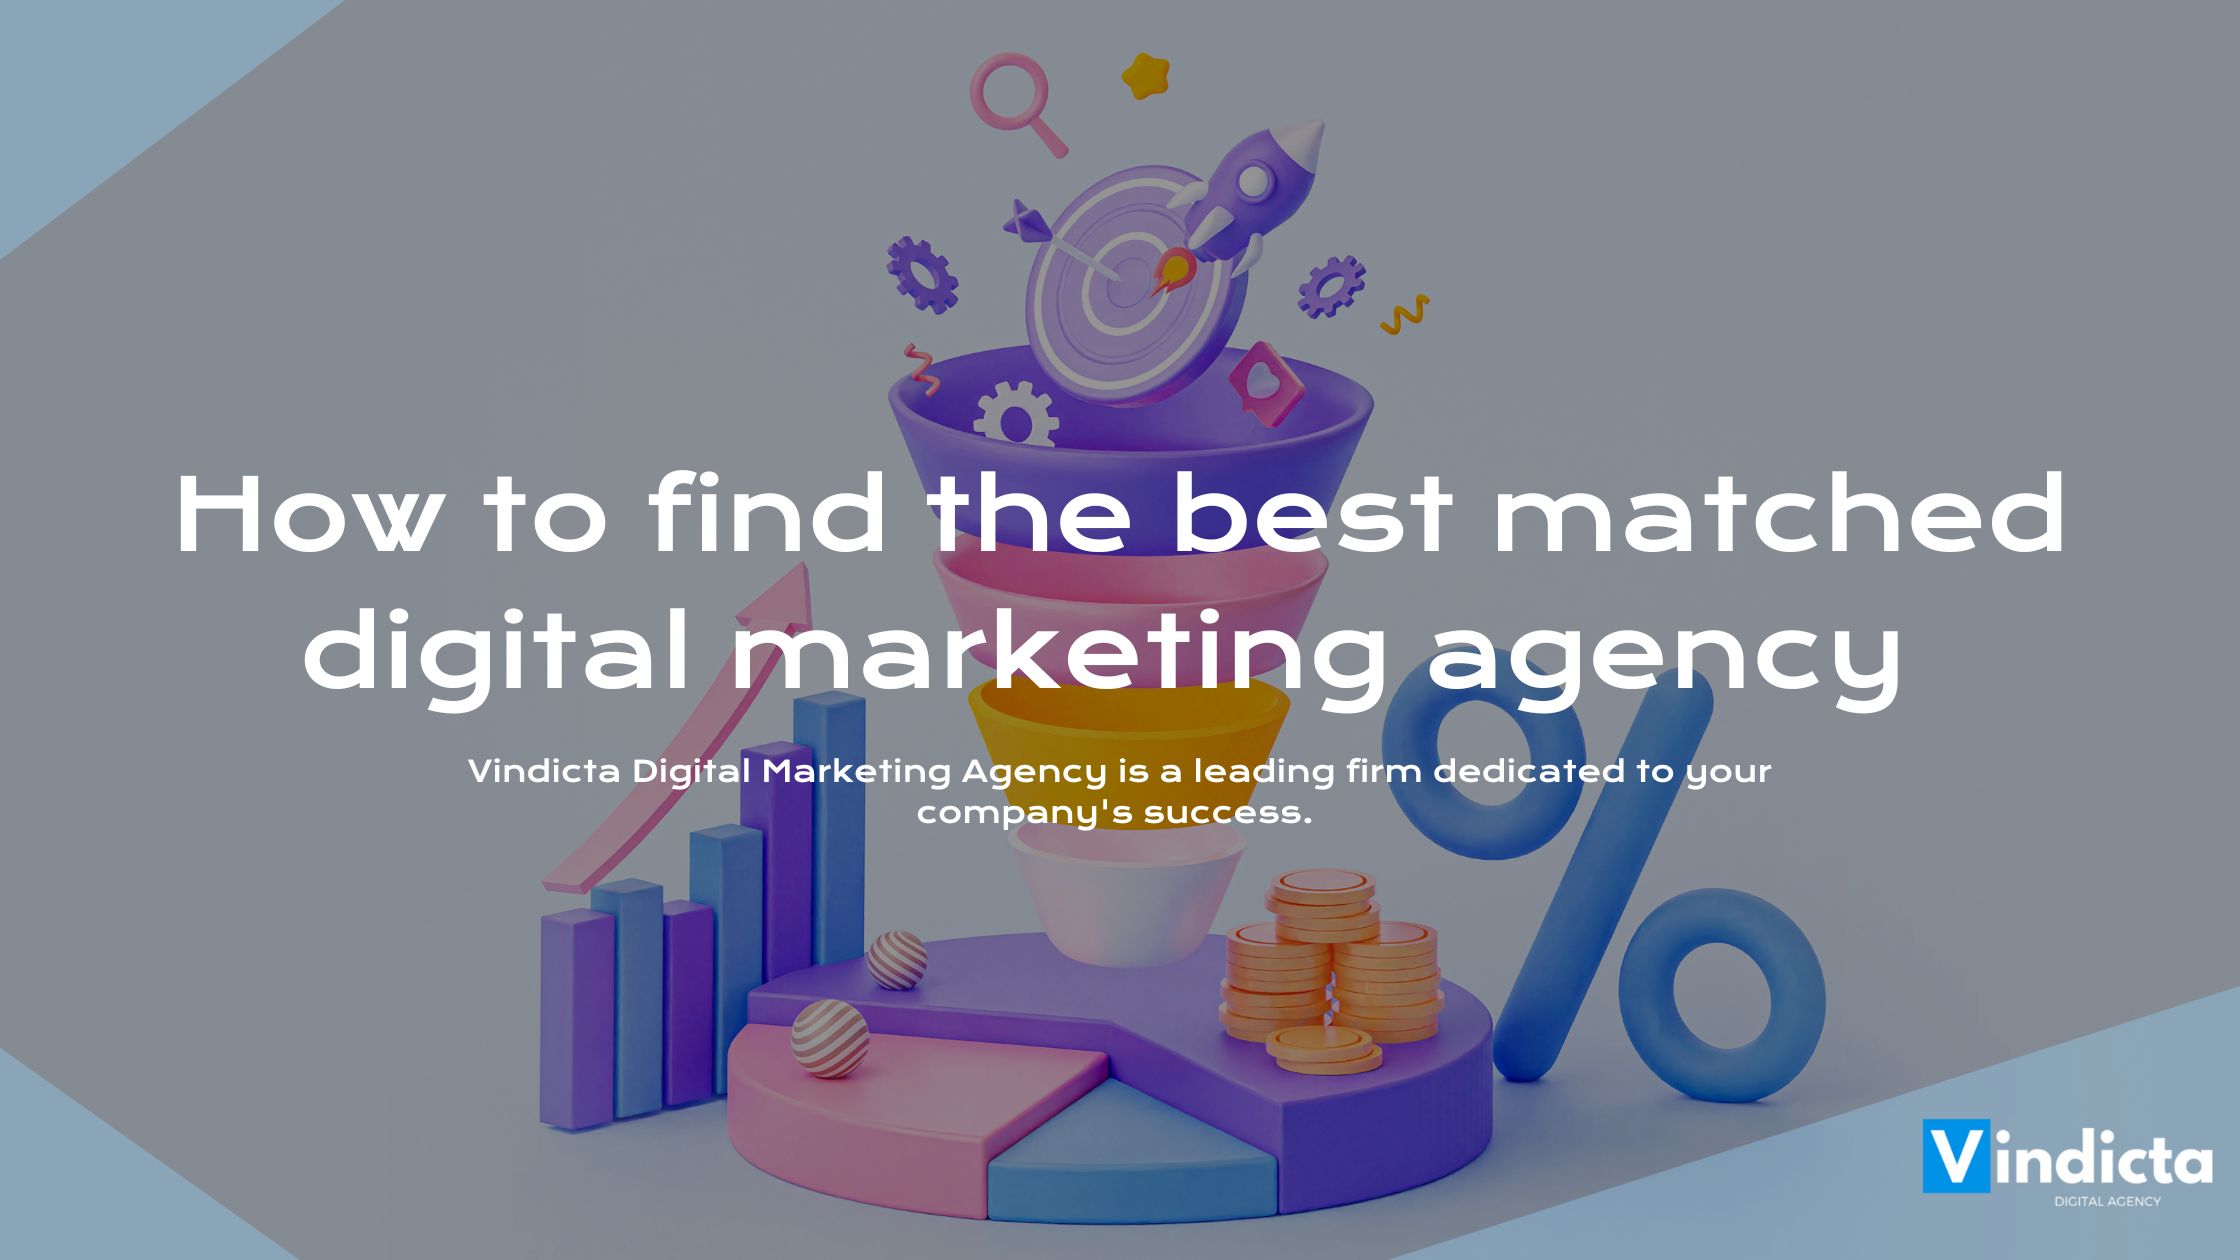 How to find the best matched digital marketing agency for your business